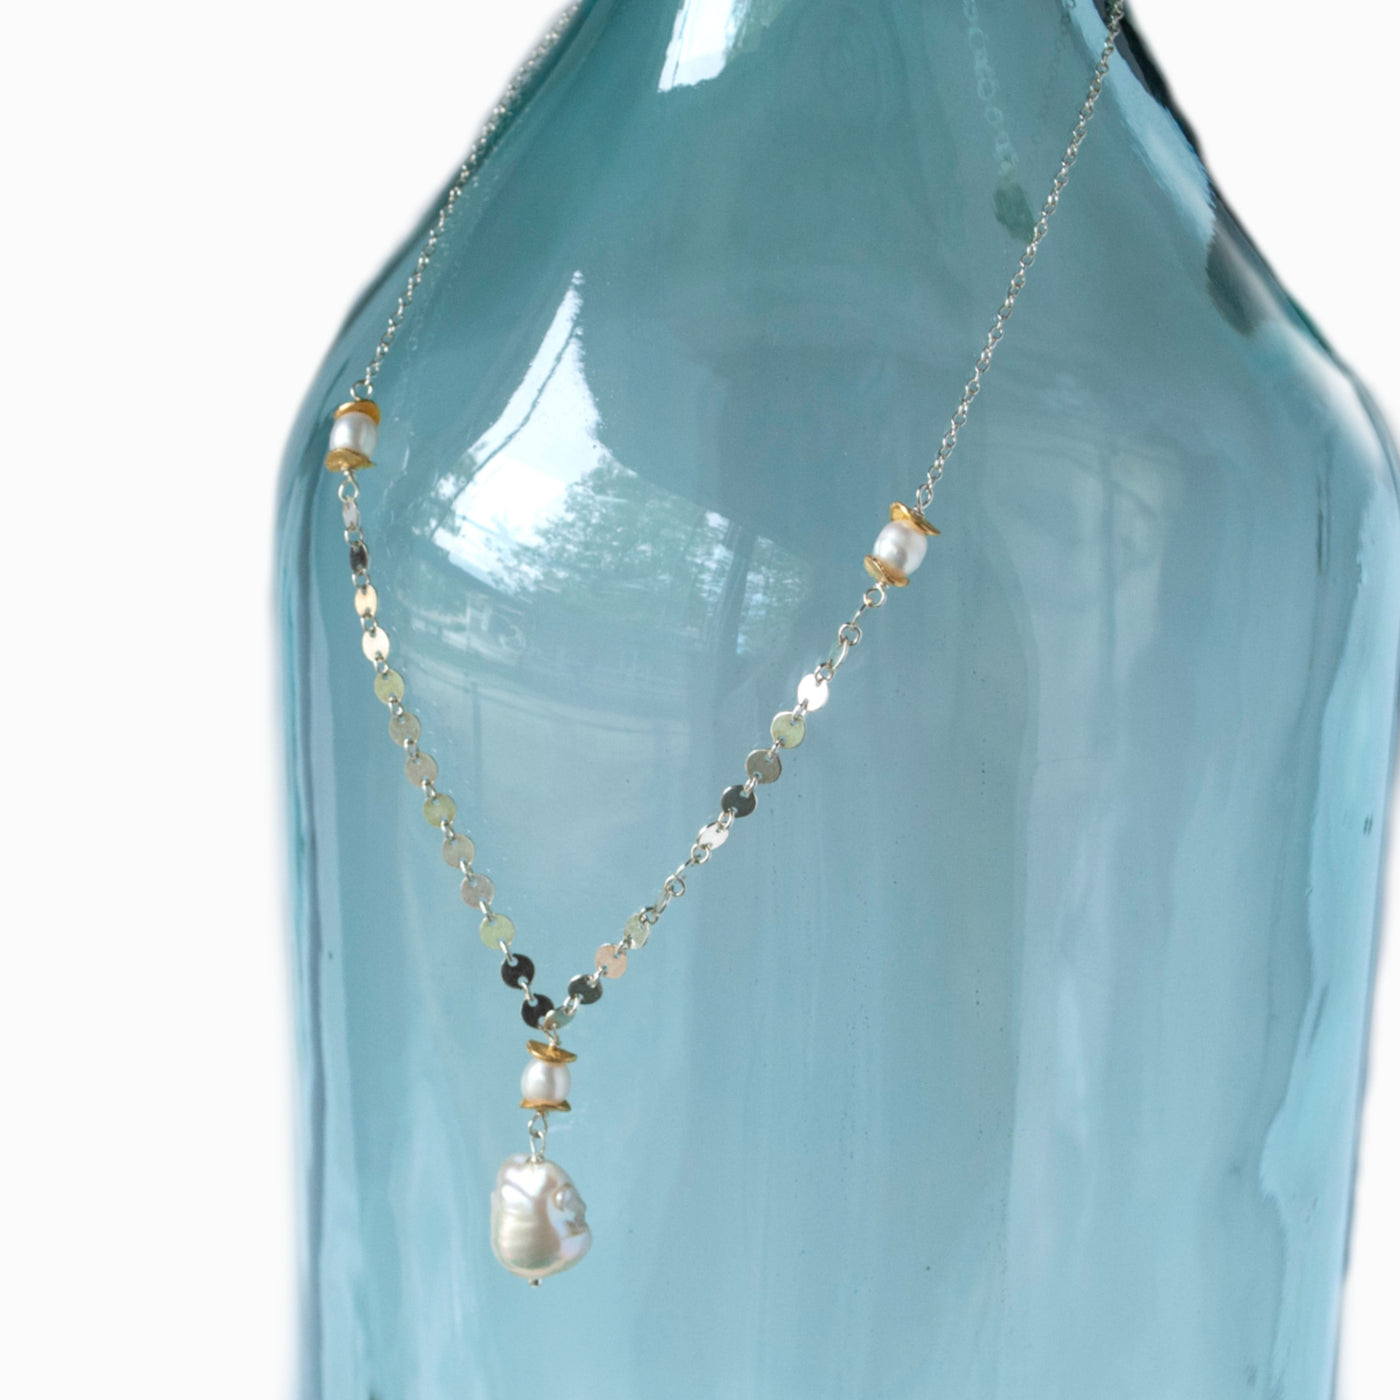 Baroque pearl necklace with sterling silver sequin chain, 22k gold plated accent beads. Shown on a aqua blue bottle.